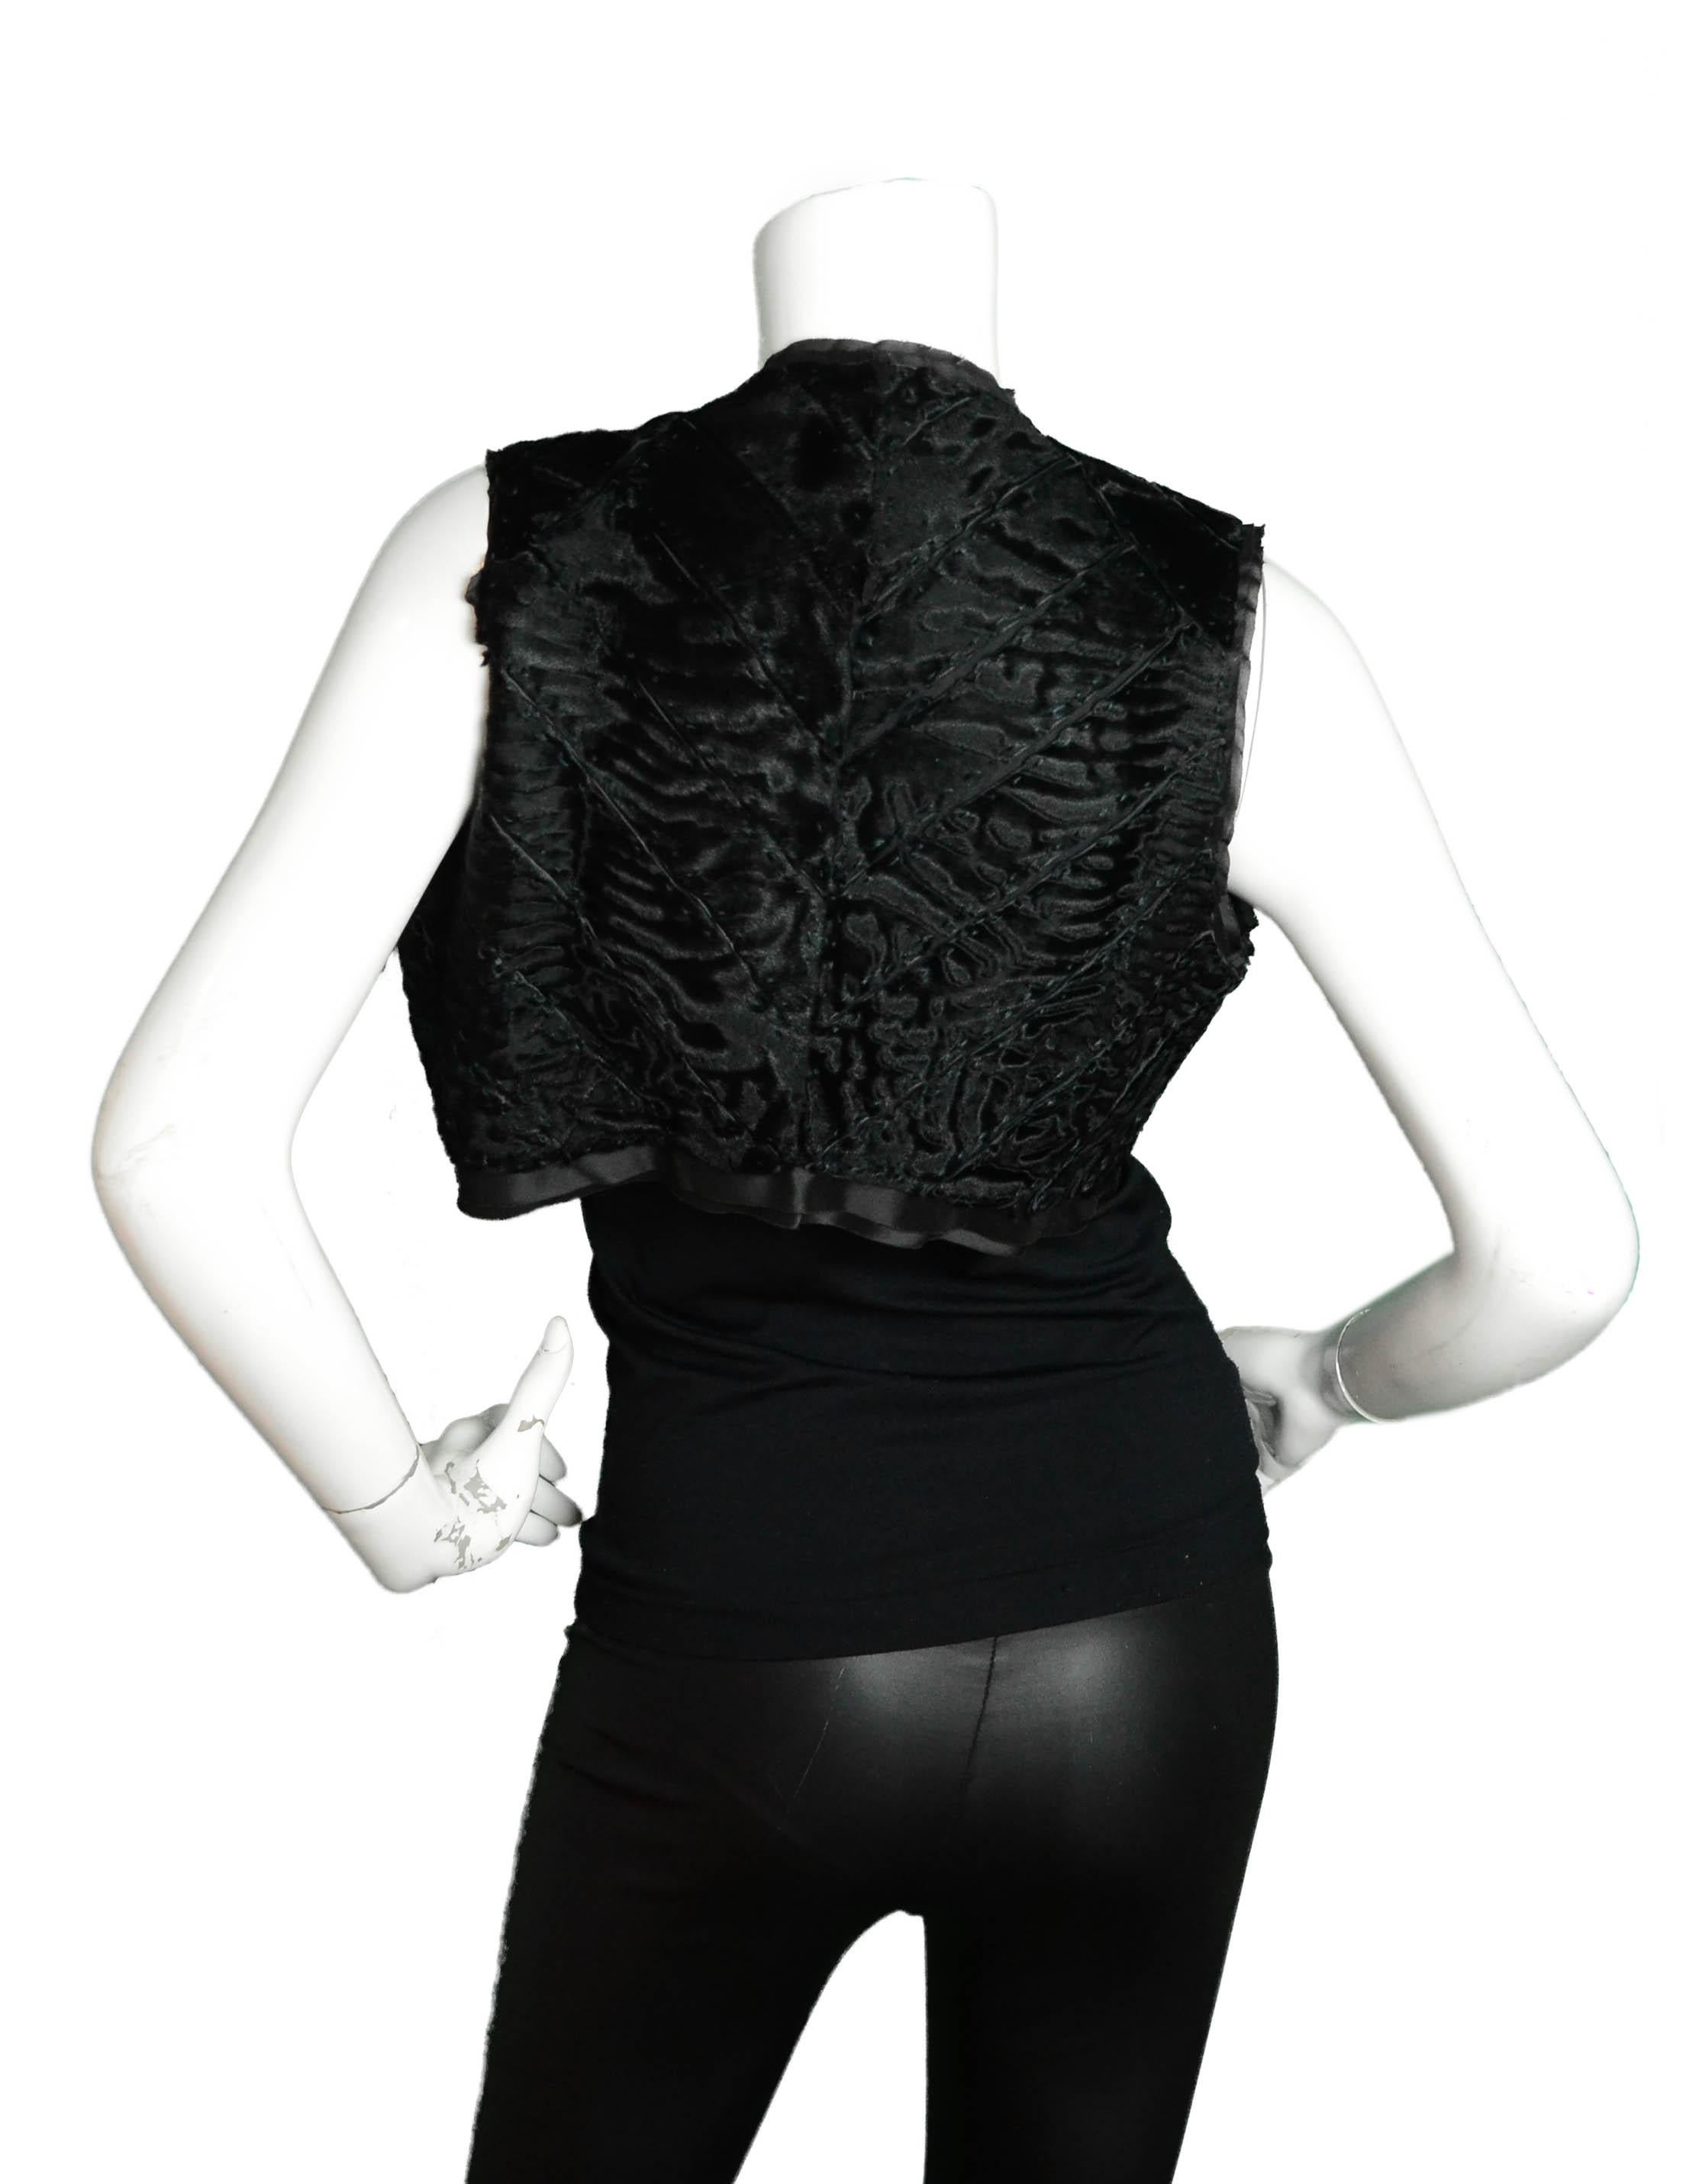 J. Mendel Black Persian Lamb Patchwork Cropped Vest

Made In: France
Color: Black
Materials: Persian Lamb
Lining: Silk
Overall Condition: Excellent

Tag Size: Missing tag *Please refer to measurements to ensure fit
Shoulder To Shoulder: 13.5” 
Bust: